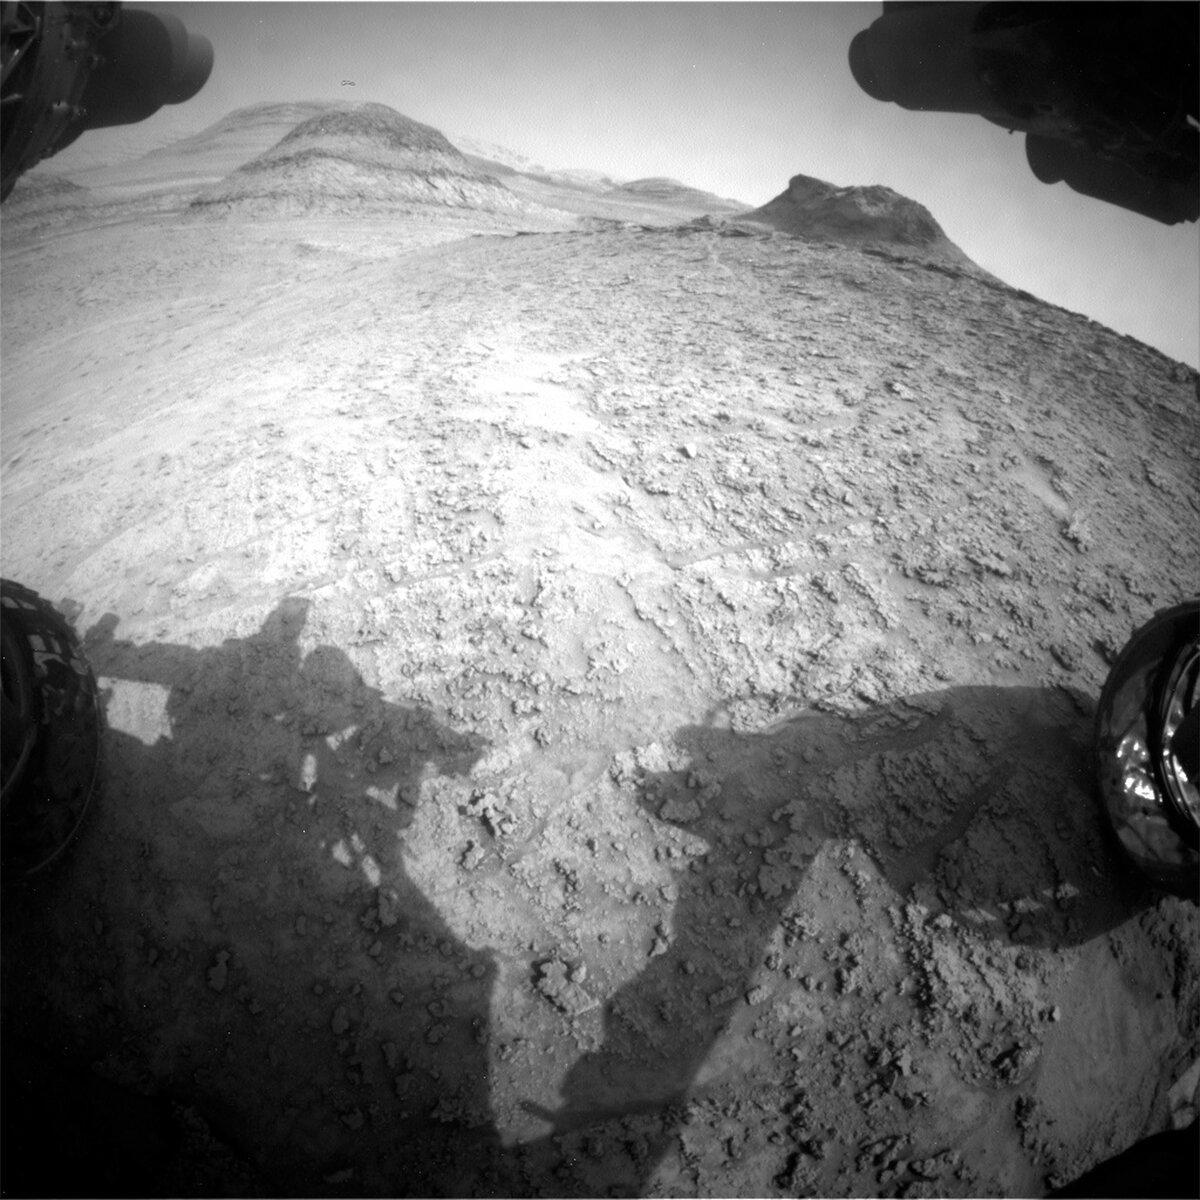 This front hazcam image taken by Curiosity shows the thin, resistant Marker band outcrop in top right of the image and the buttes ahead to the south on Mars on sol 3700.